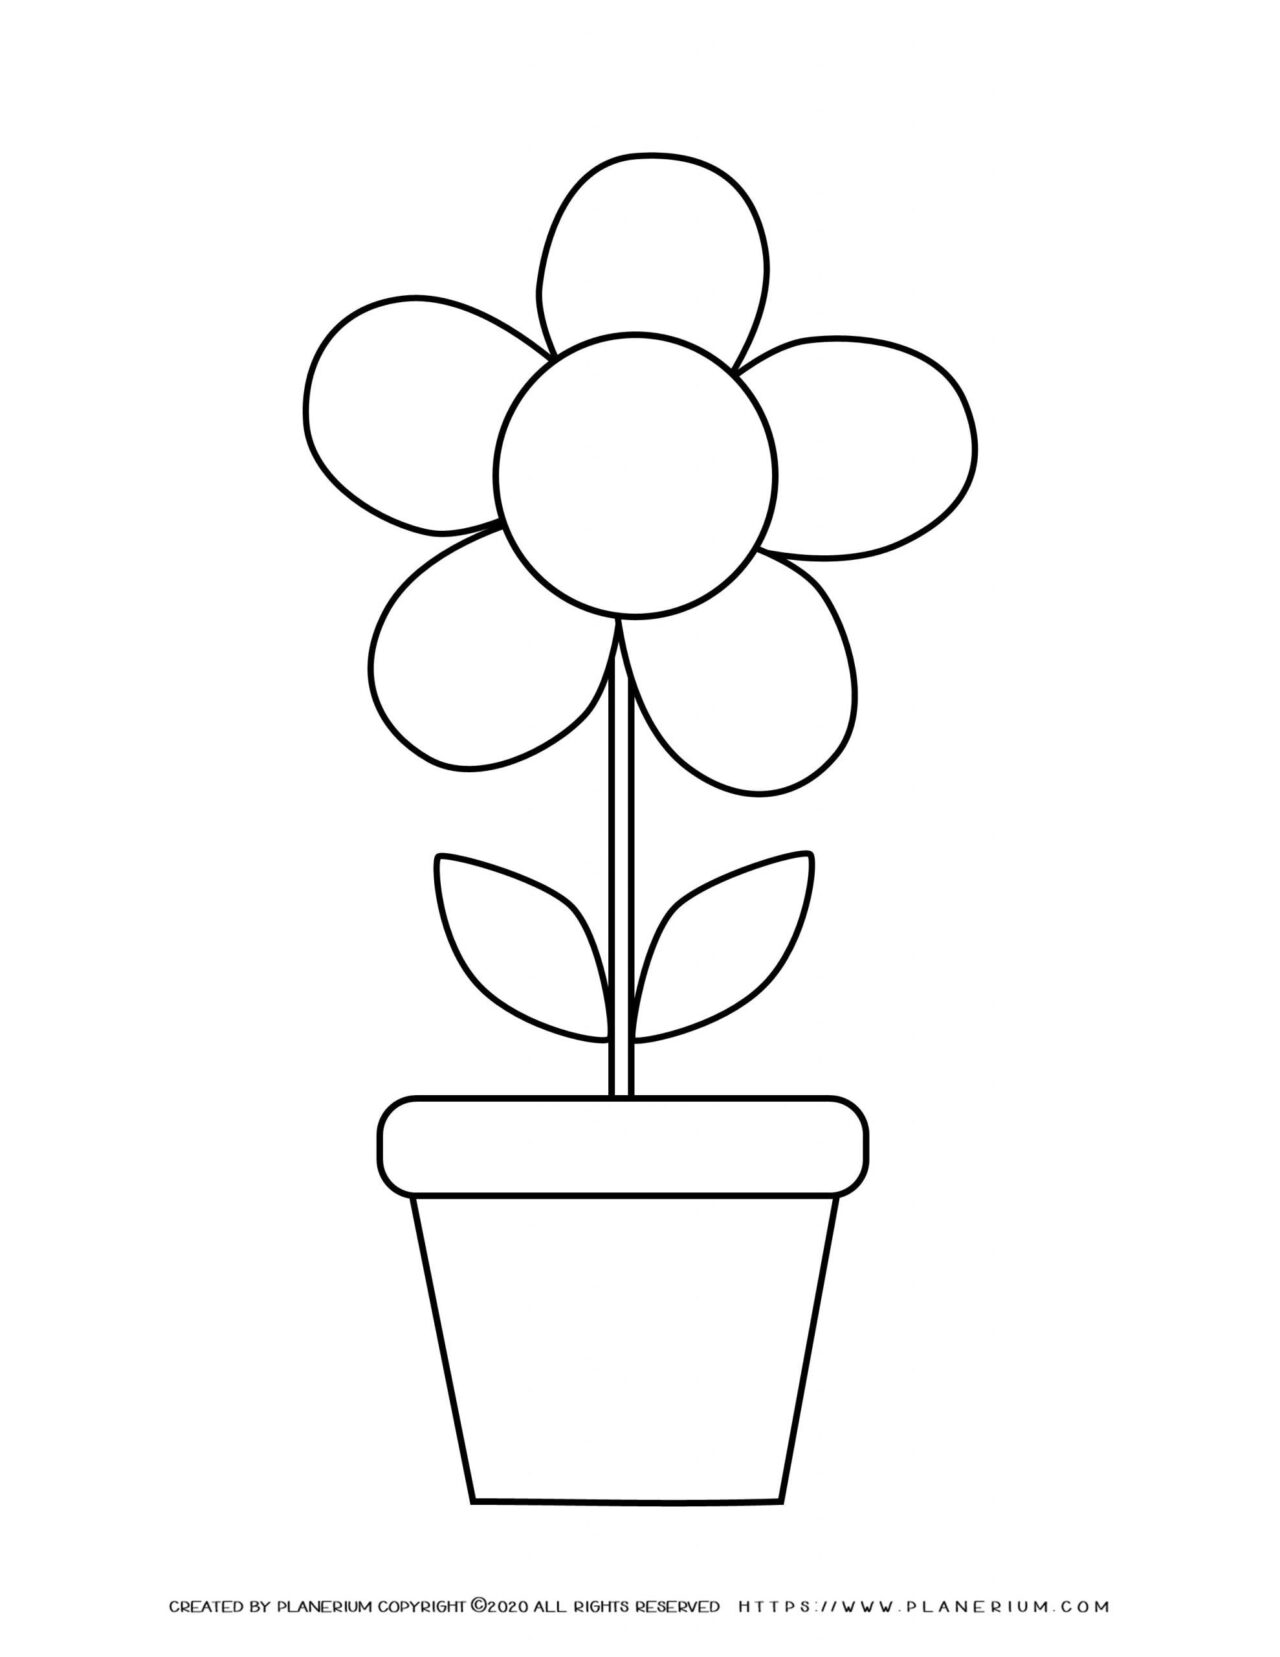 Printable spring flower in a pot coloring page for kids